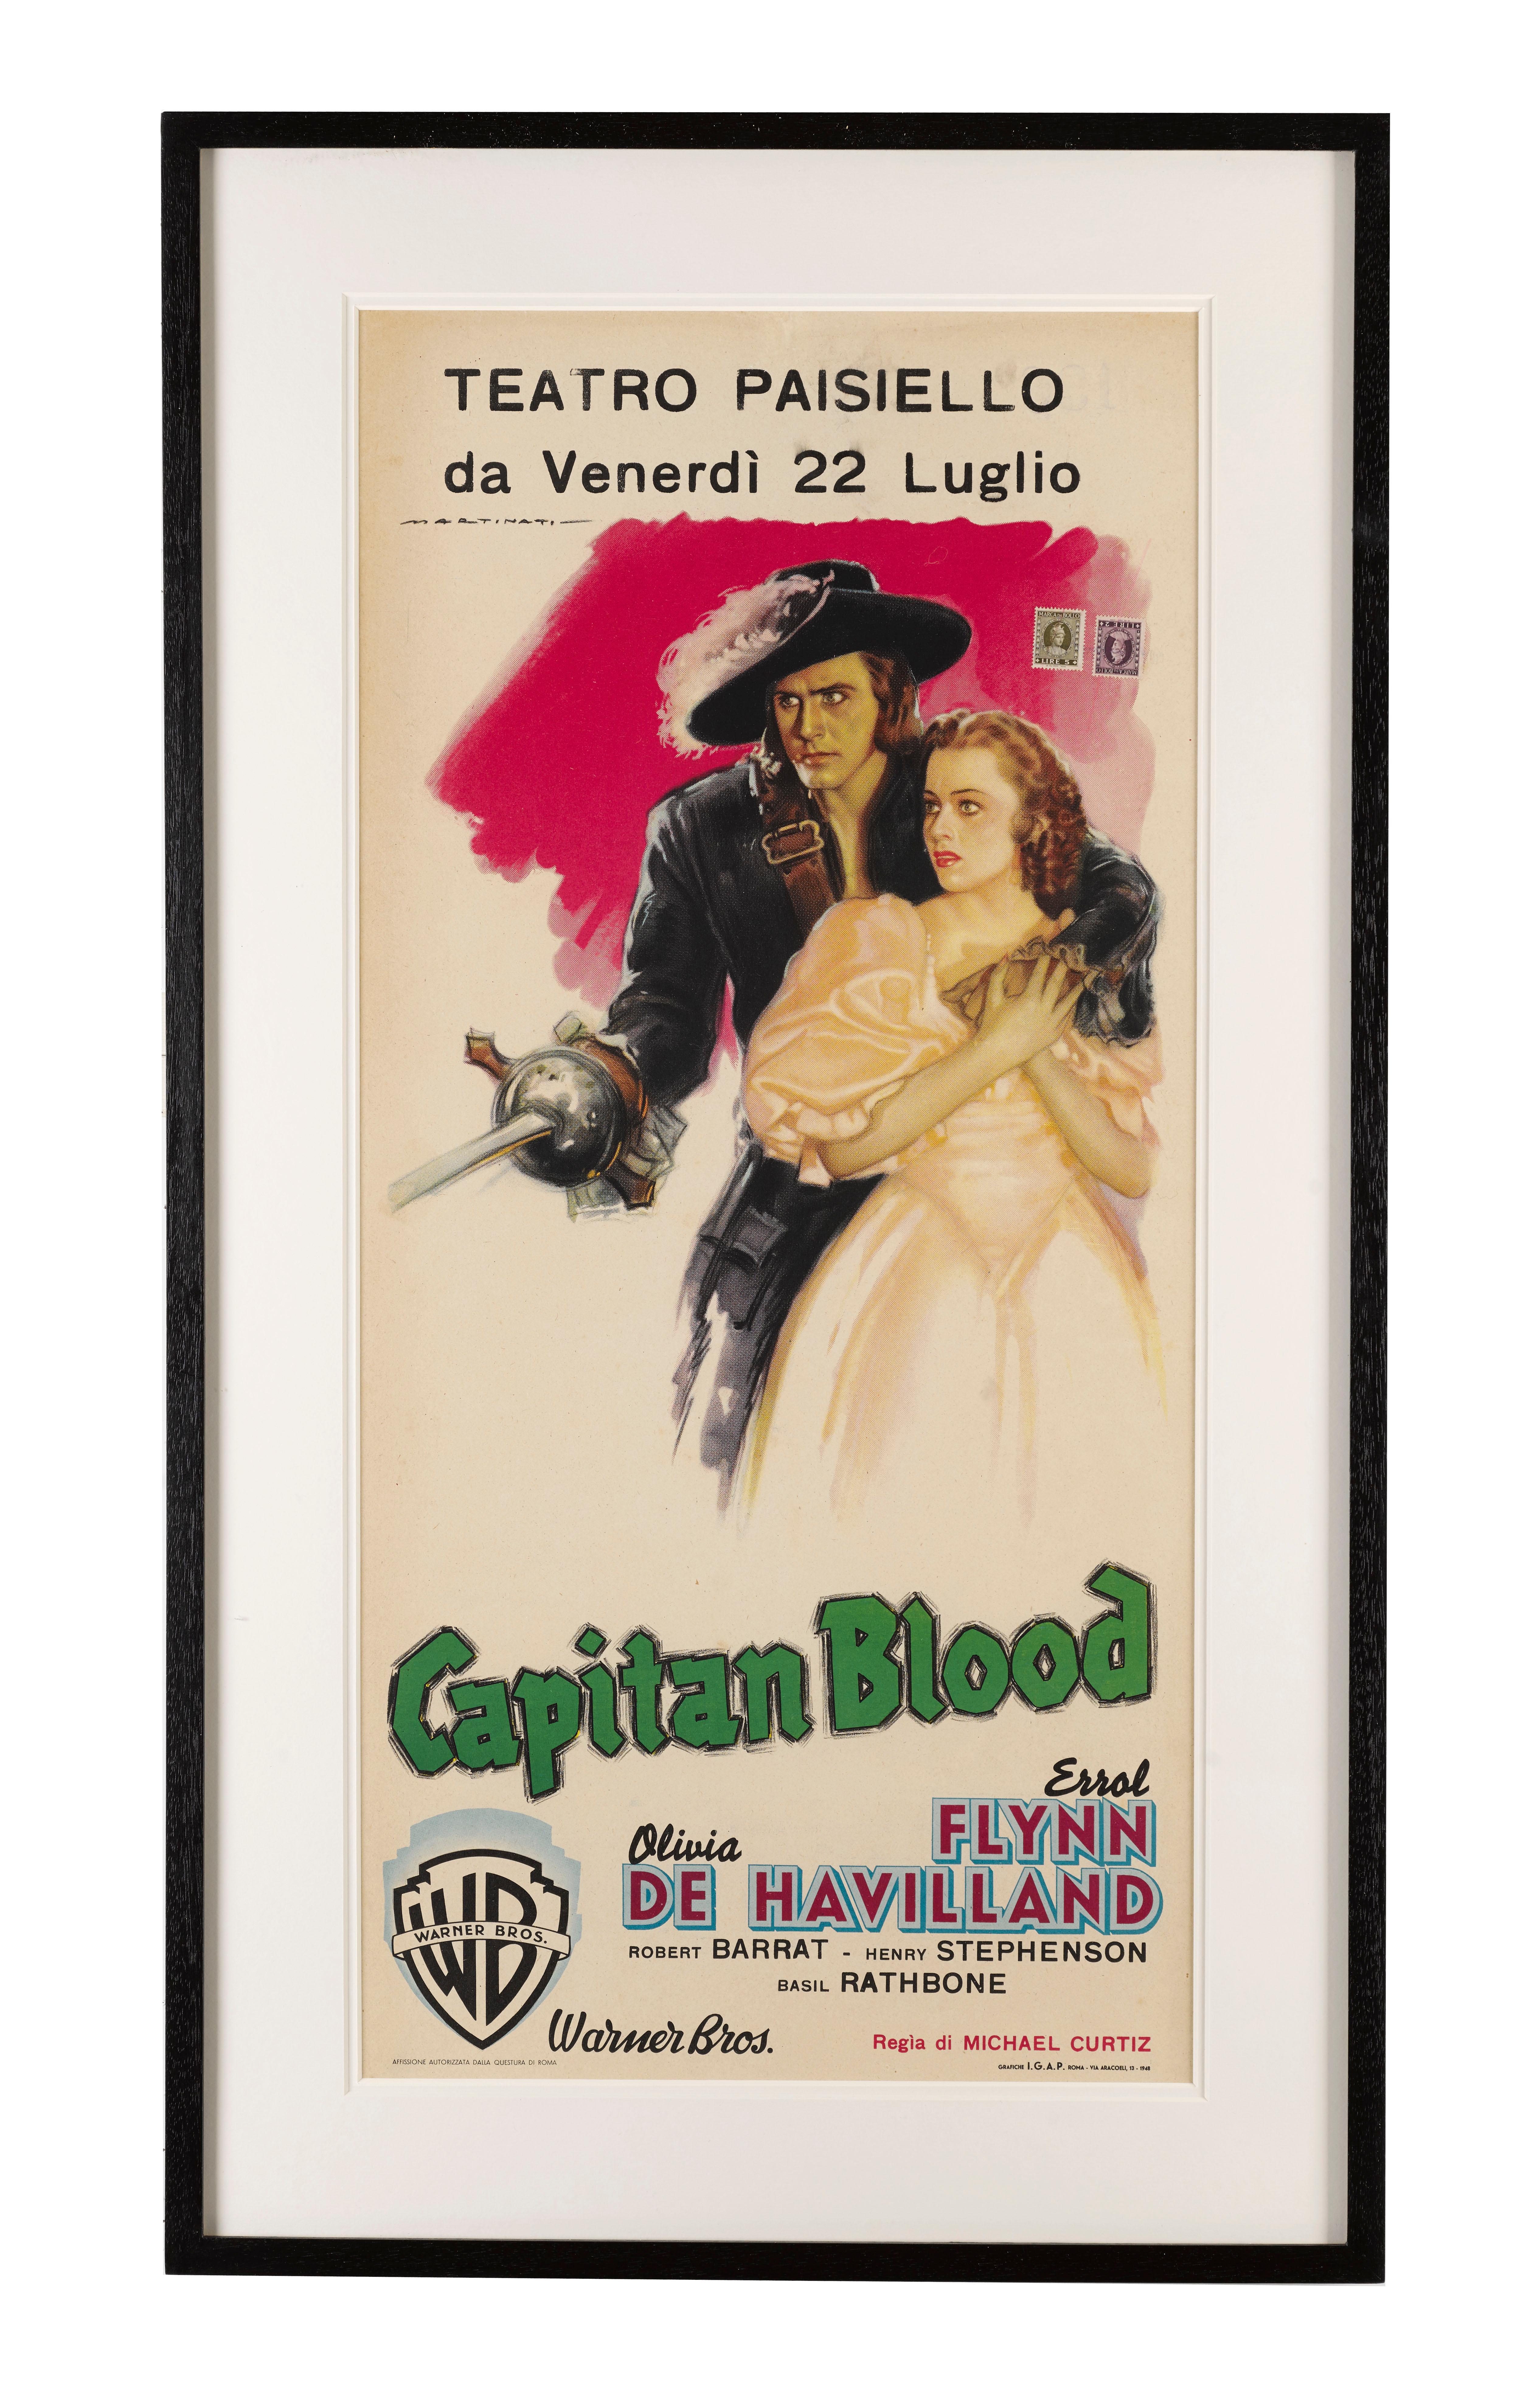 Original Italian film poster for the films  1948 rerelease .
The artwork is by one of Italy most celebrated poster designers Luigi Martinati (1893-1984) This poster features the best artwork on any poster for this title.
Captain Blood was directed